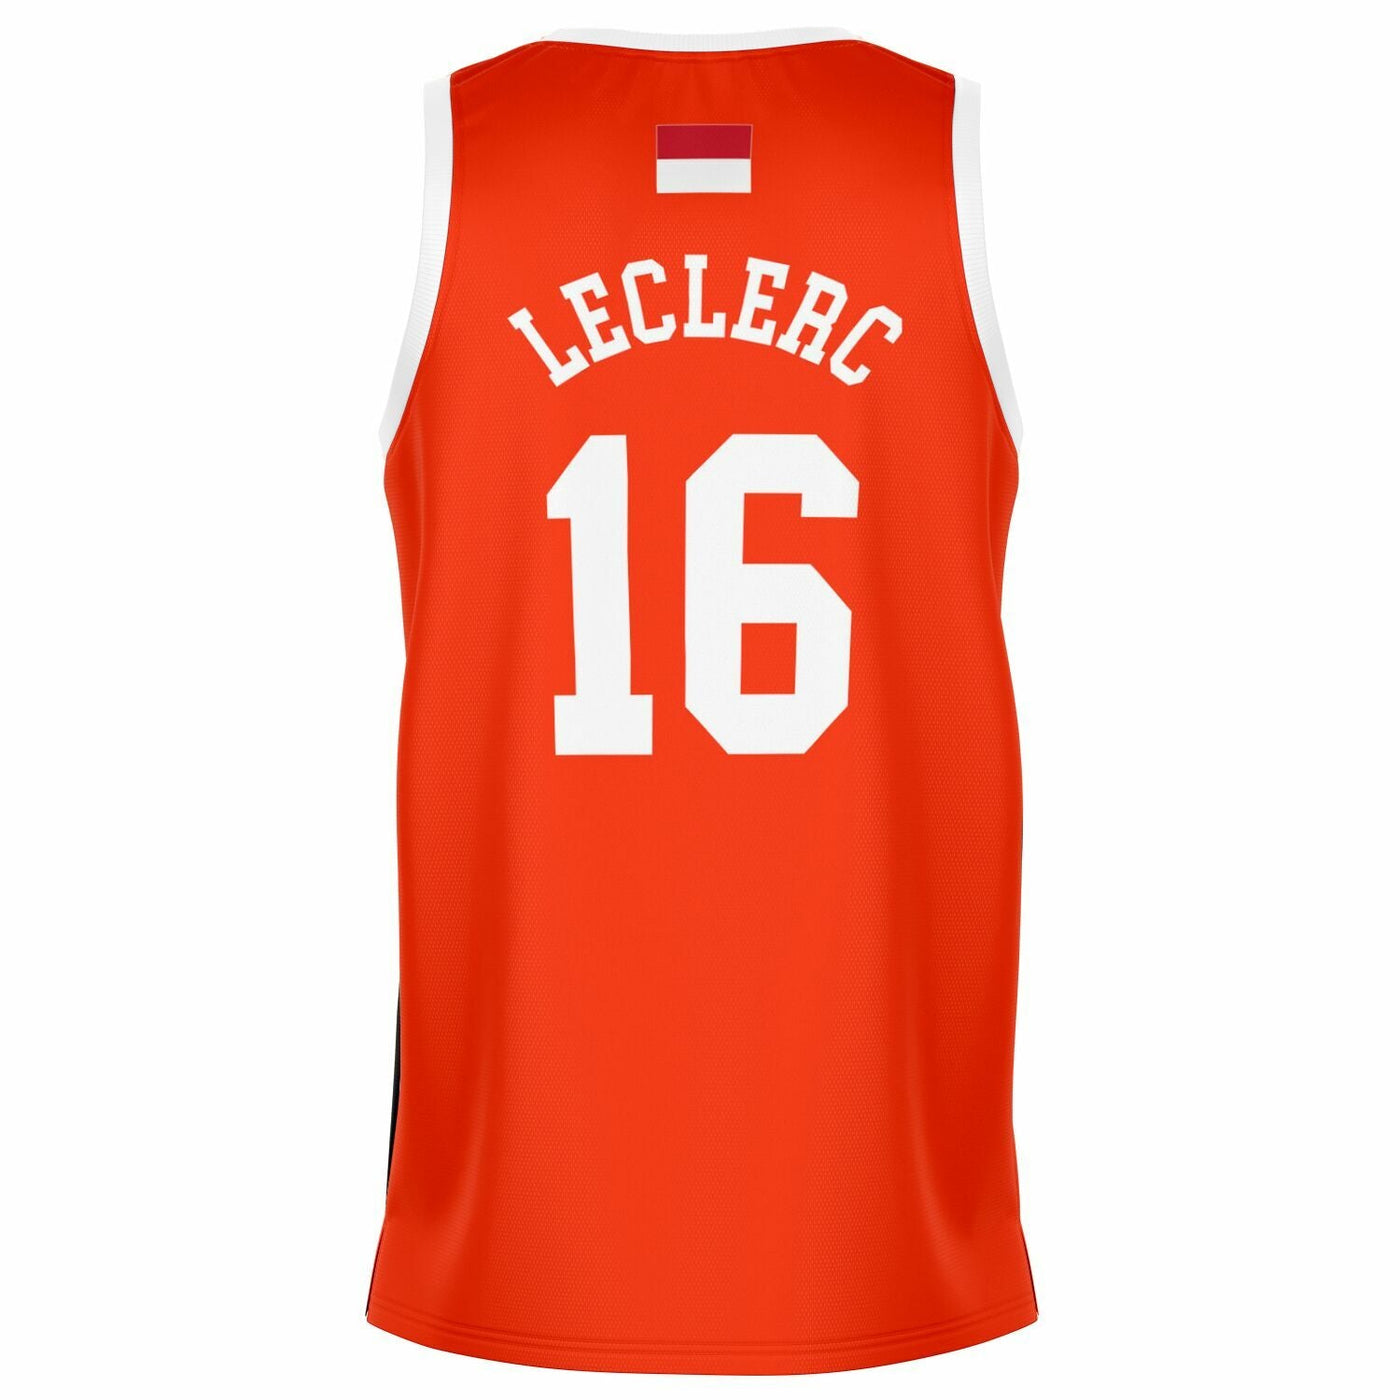 Leclerc - Away Red Classic Edition Jersey - Furious Motorsport